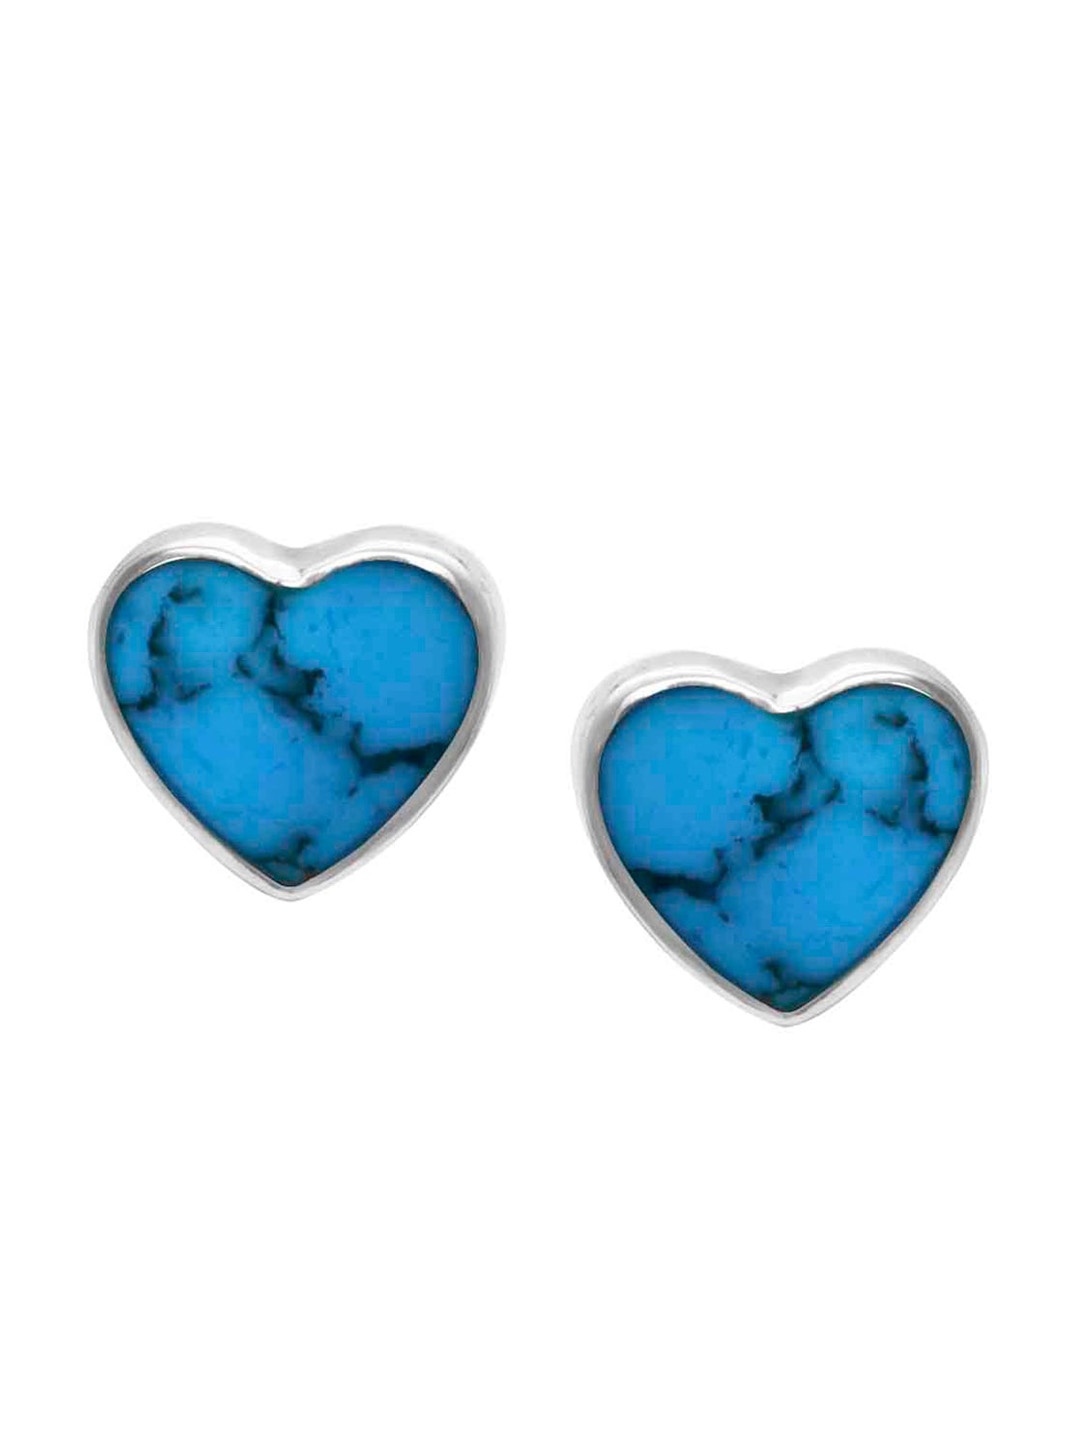 

Abhooshan Mother of Pearl 92.5 Sterling Silver Heart Shaped Studs Earrings, Turquoise blue